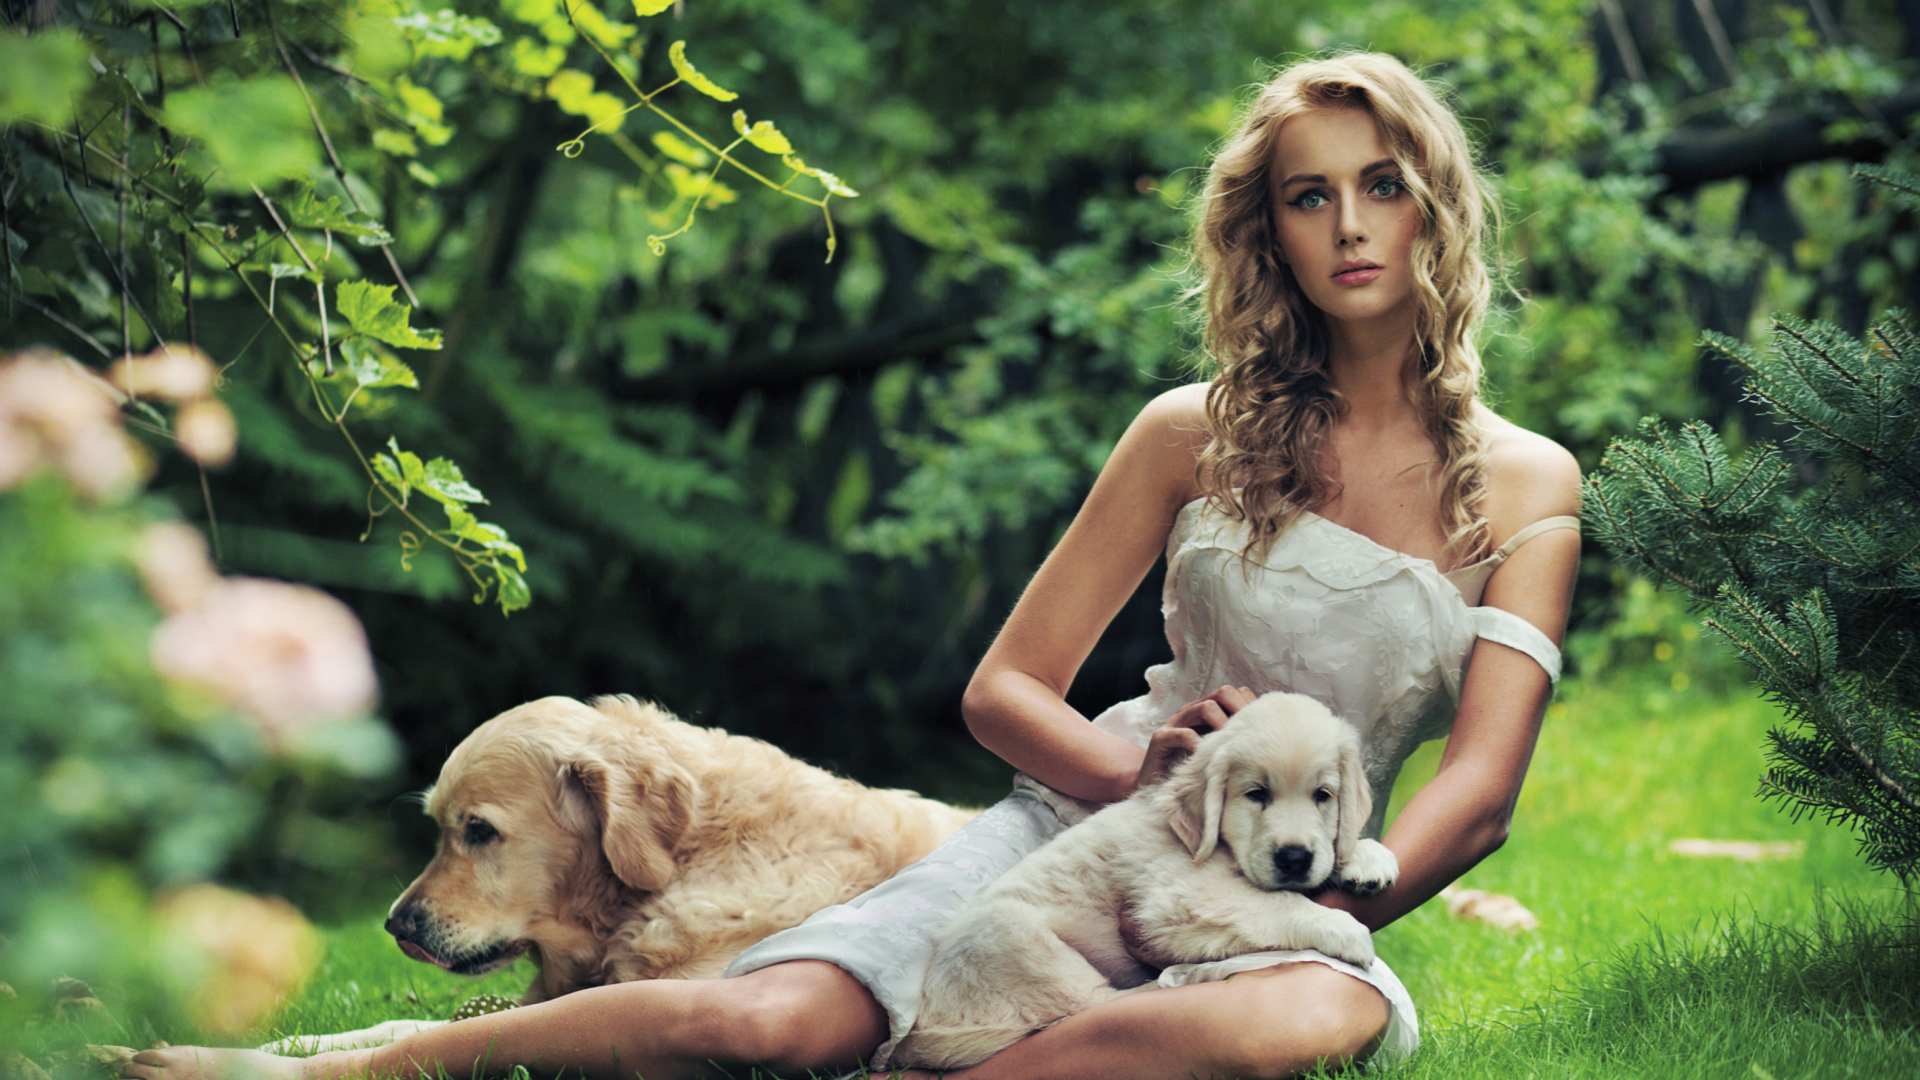 Model And Dogs wallpaper 1920x1080